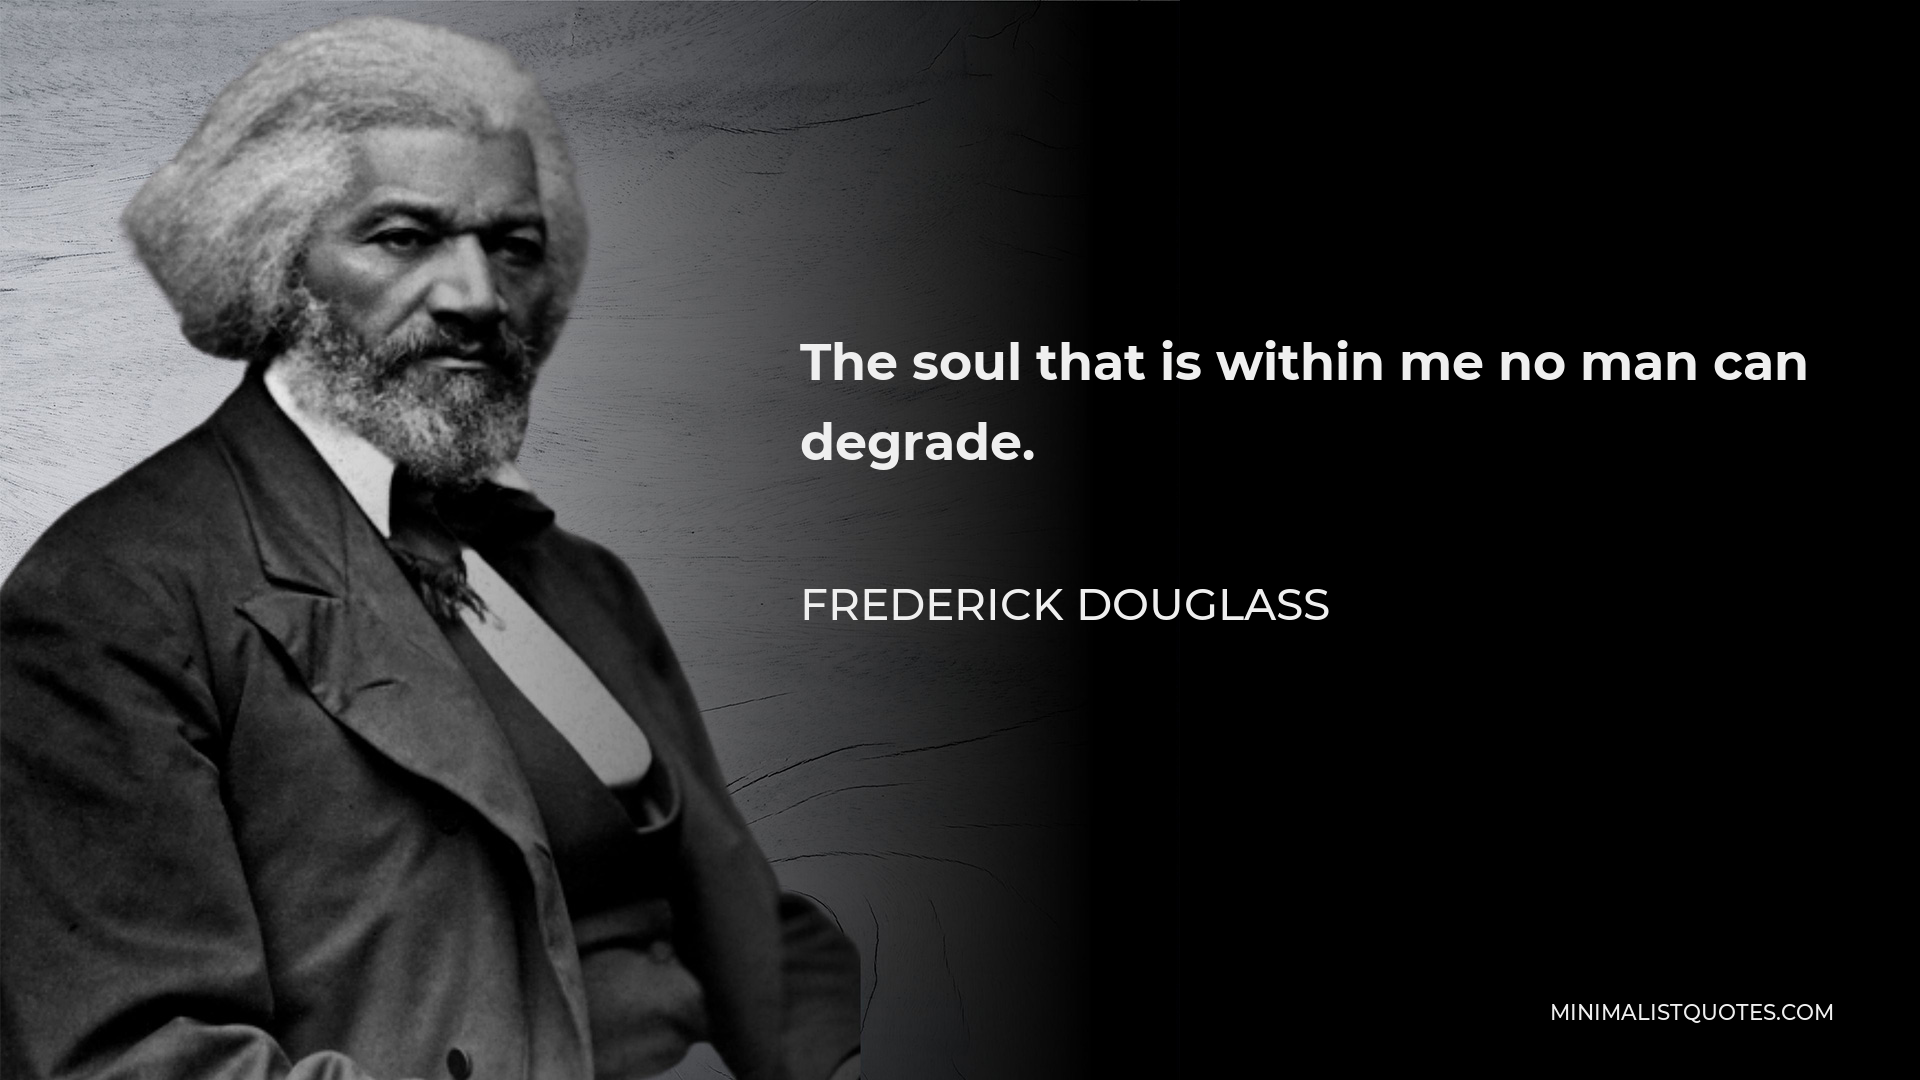 Frederick Douglass Quote: The soul that is within me no man can degrade.